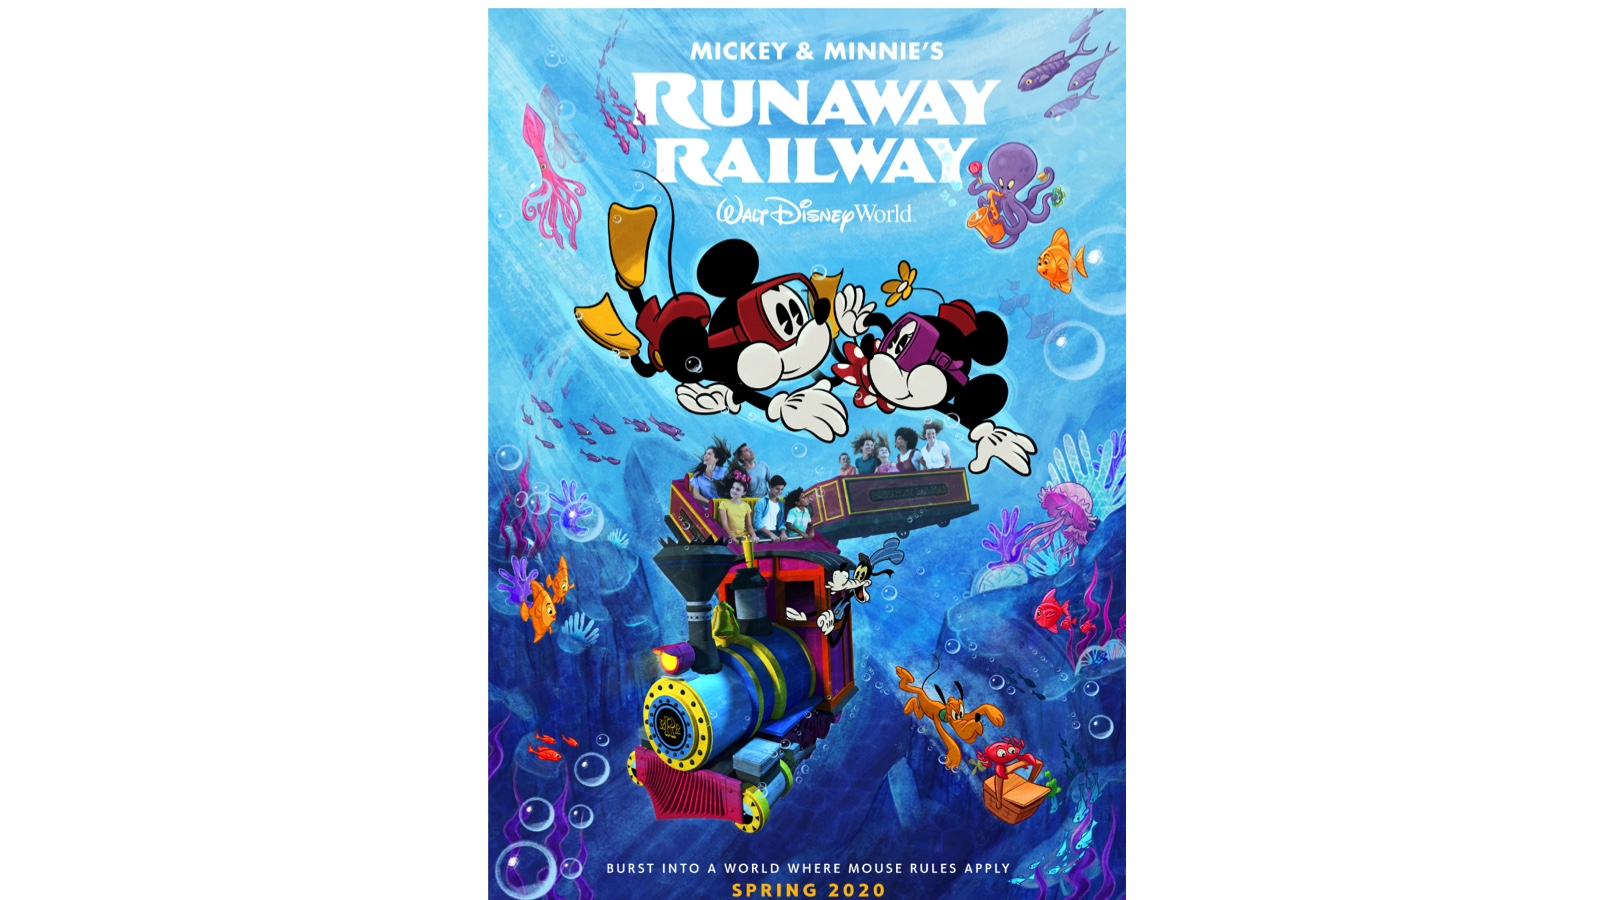 New Poster Released for Mickey & Minnie’s Runaway Railway